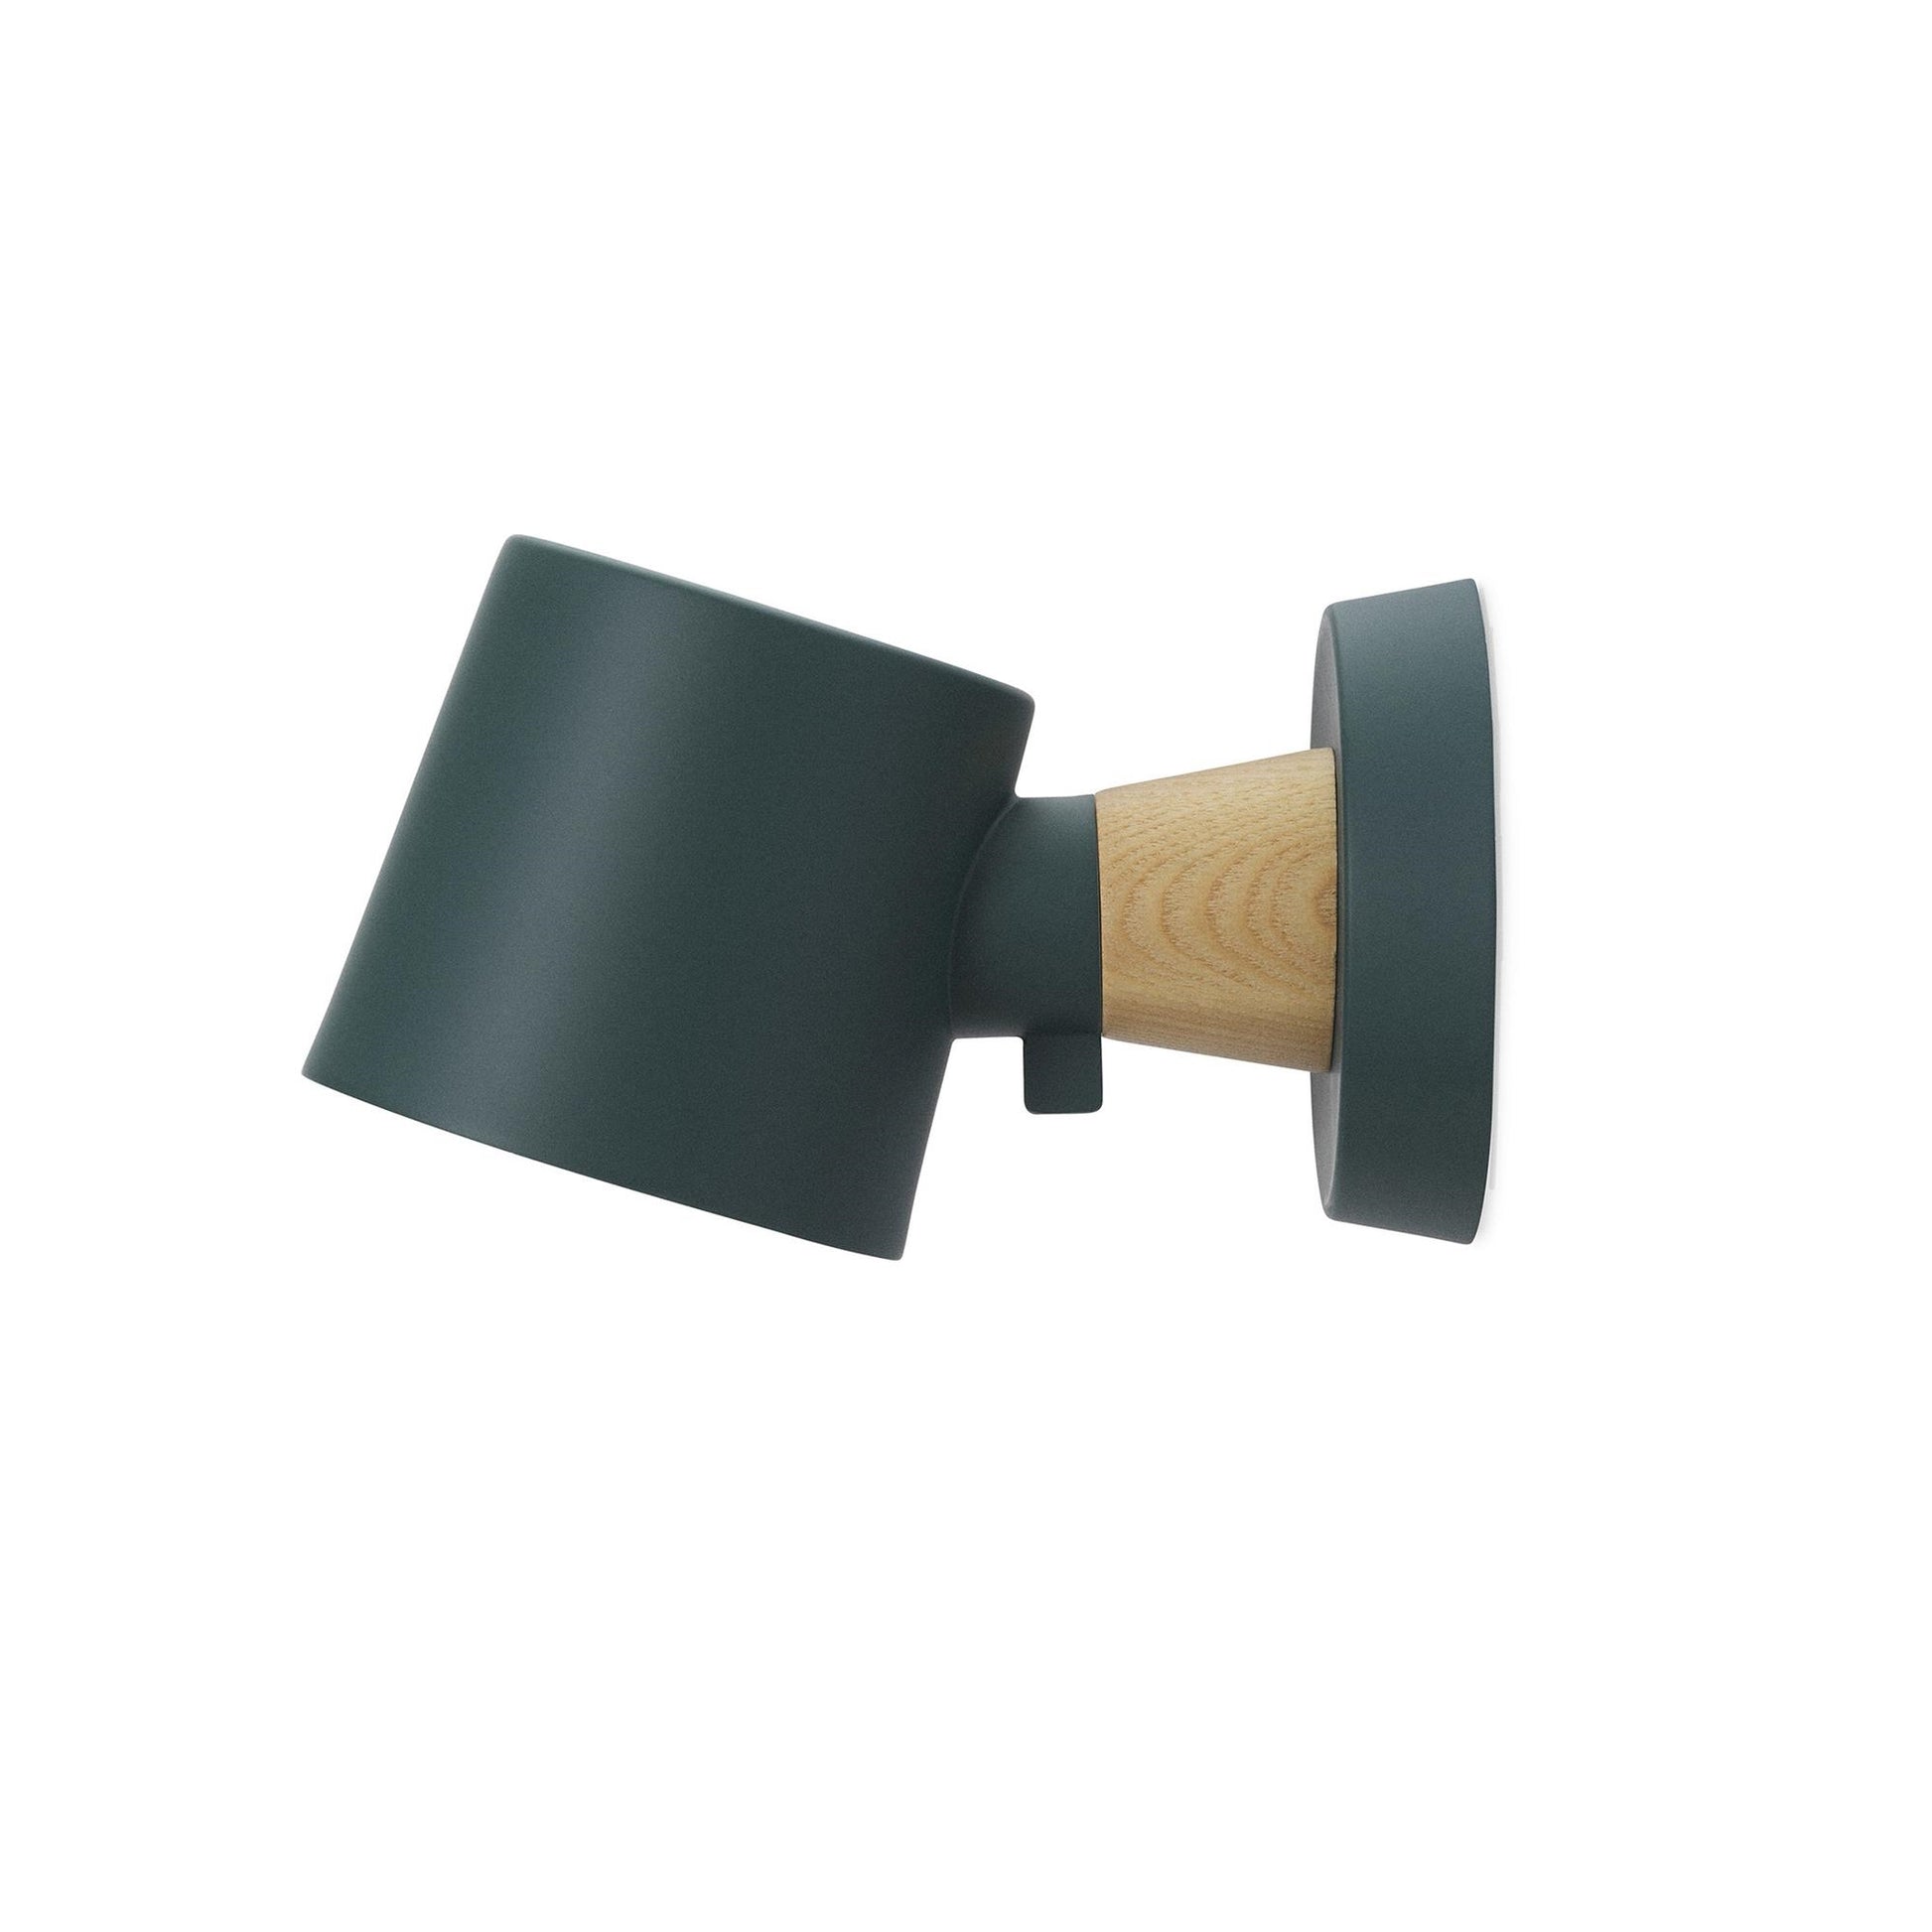 Rise Wall Lamp Without Cord by Normann Copenhagen #Petroleum Green